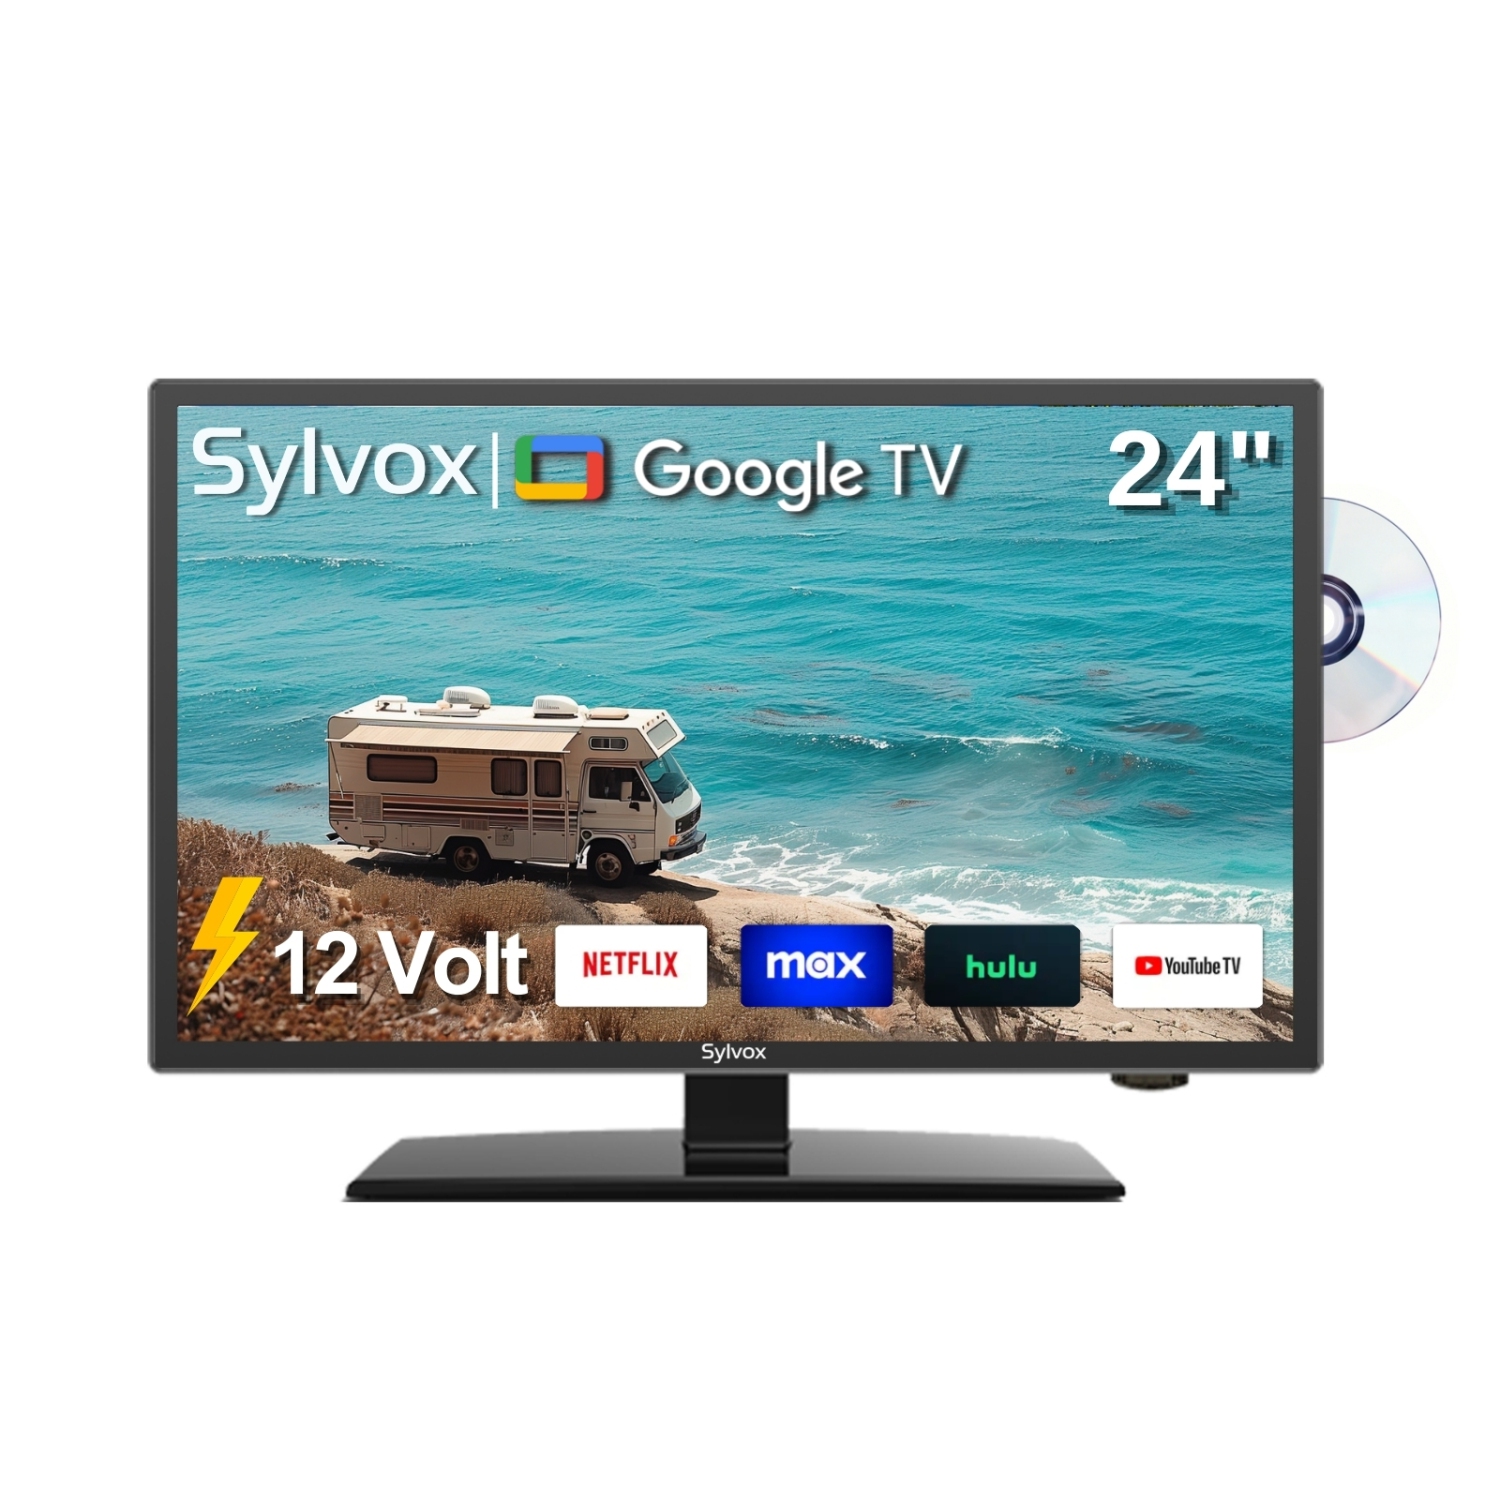 SYLVOX Smart 12Volt TV, 24" Newest Google TV Support Download APPs with Google Assistant, 1080P DC/AC Powered Television for RV Camper